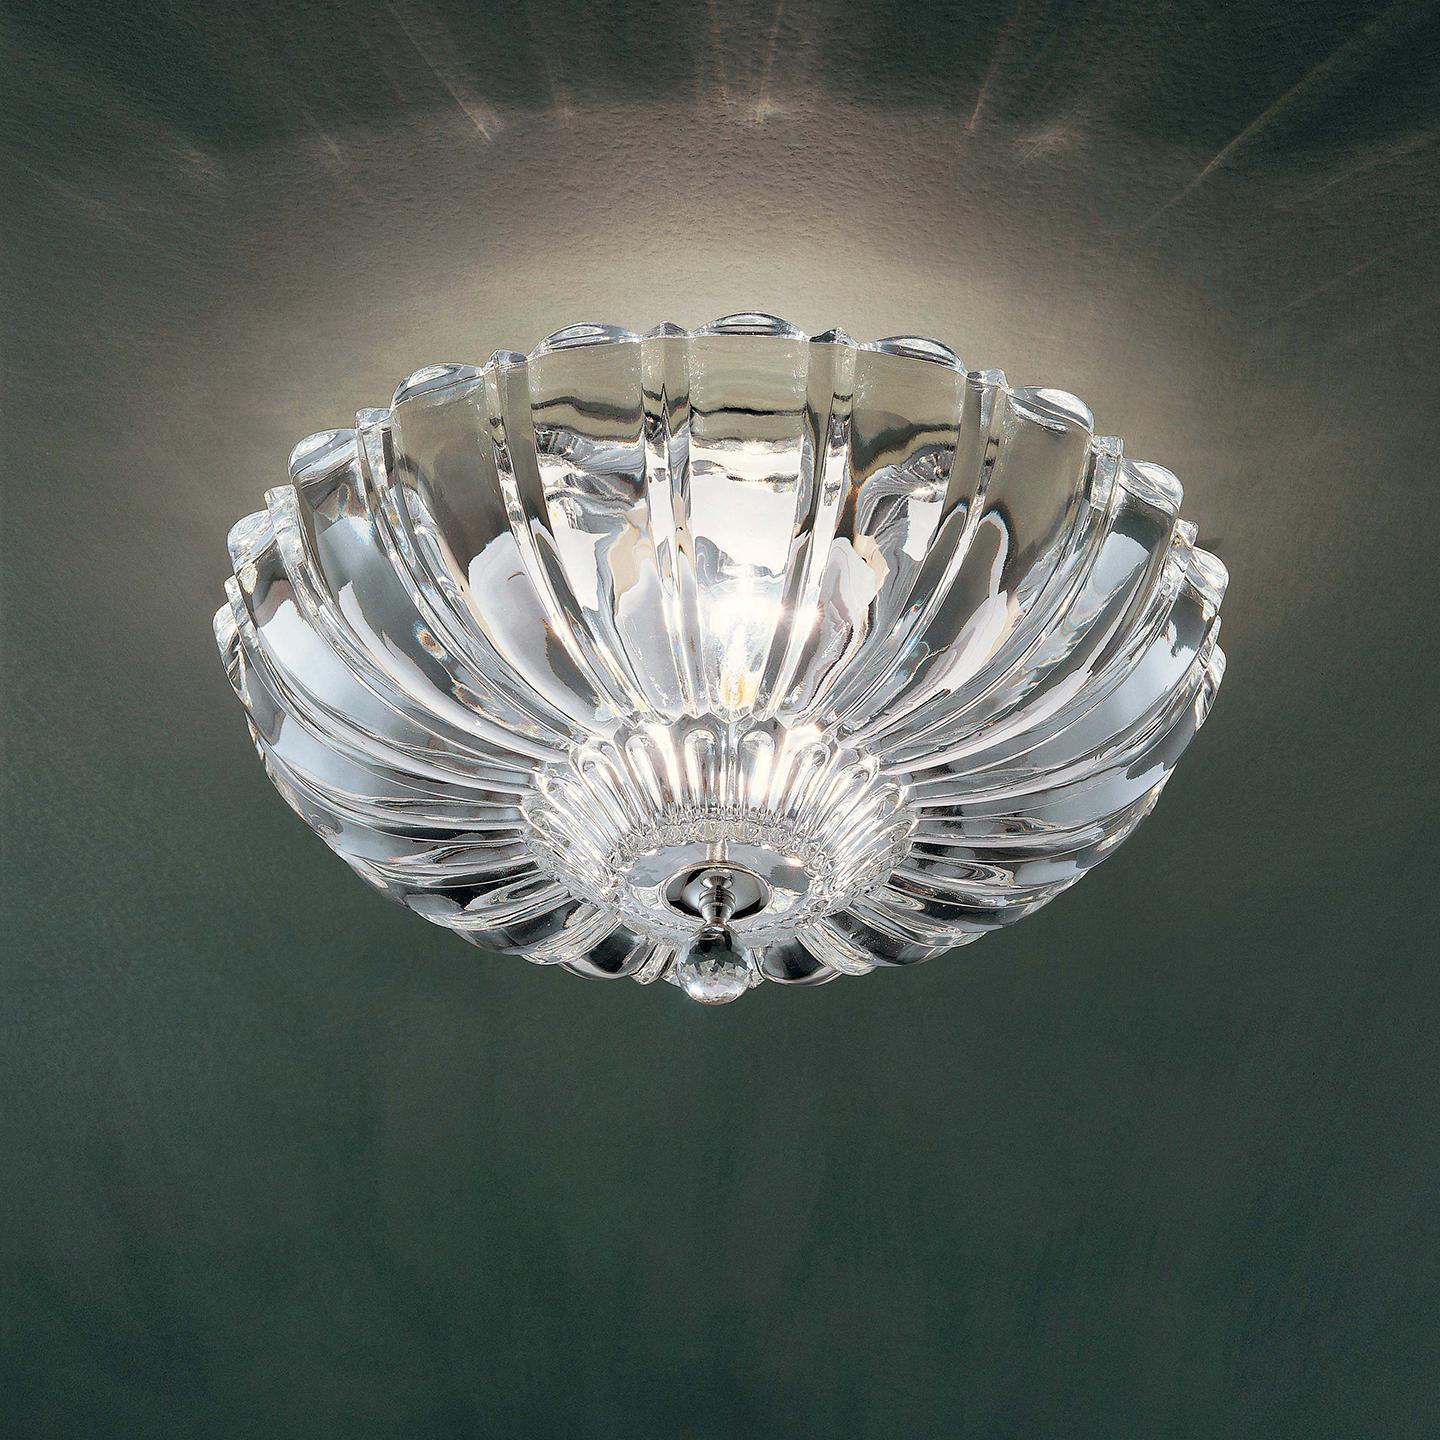 Pascale was designed by Leucos Design Lab in 2005 as a stunning transitional lamp. Pascale is a shimmering crystal lamp handmade in Italy using a pressed rib mold. The Pascale collection includes a ceiling and a wall lamp. Made of genuine crystal.